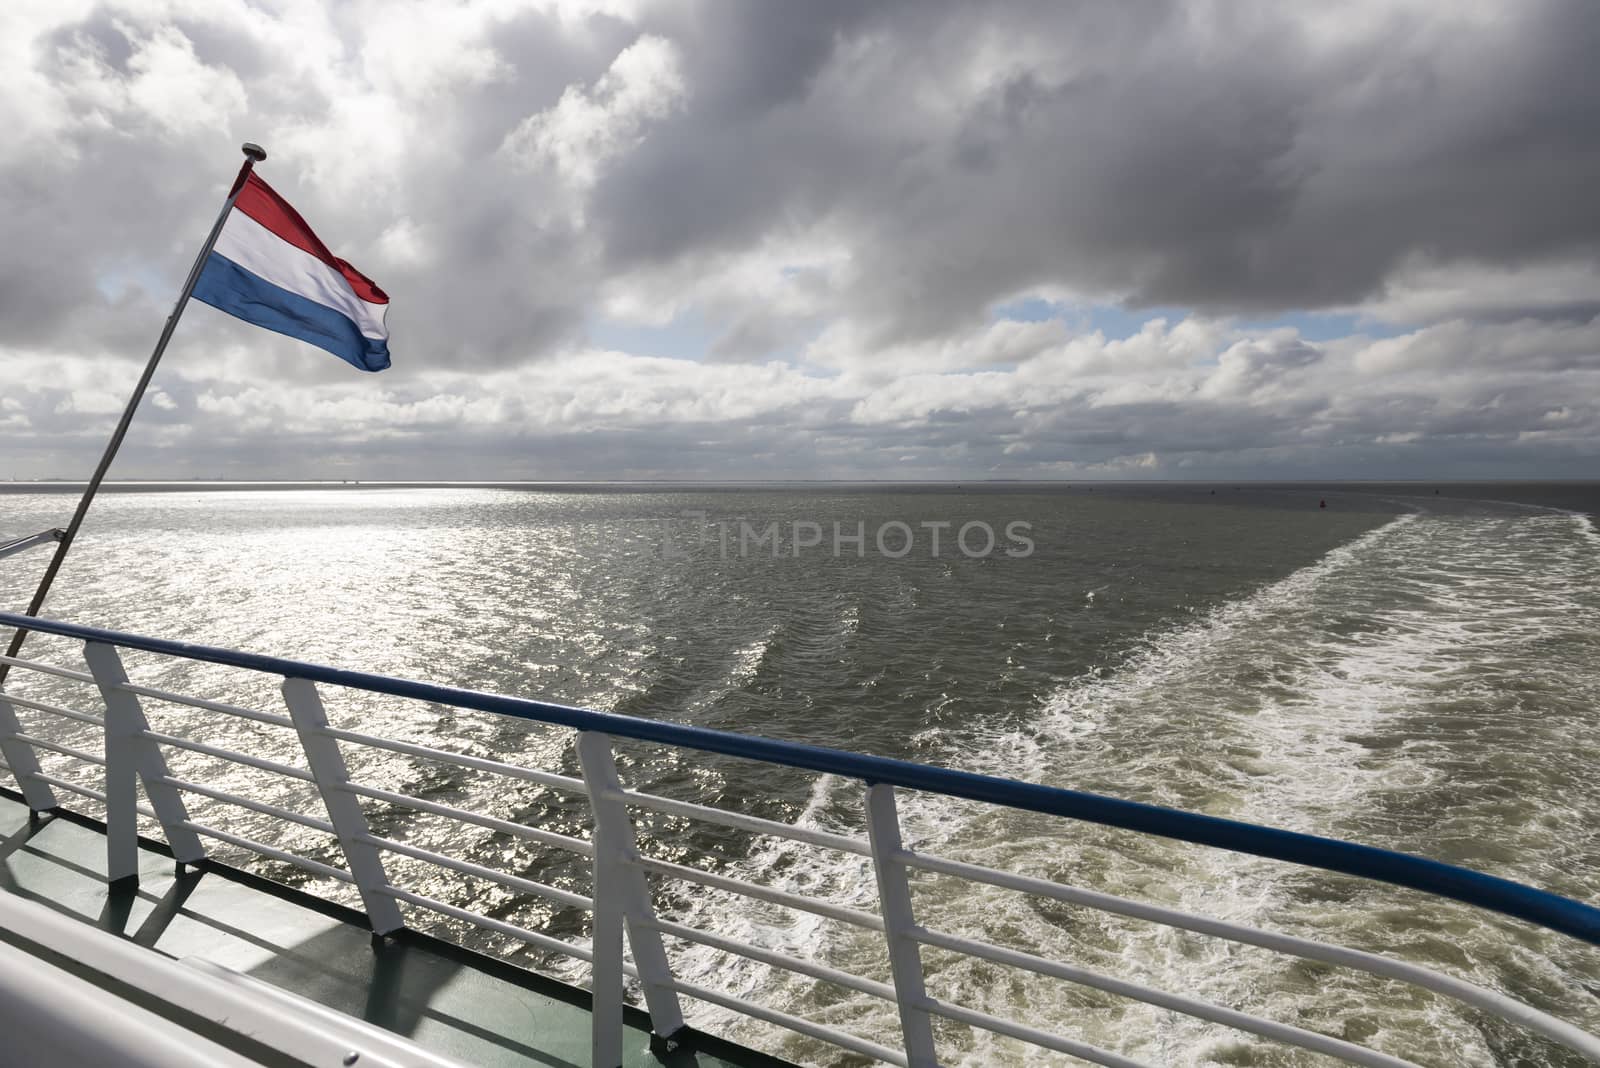 Wadden Sea with Dutch flag and wake as seen from the ferry
